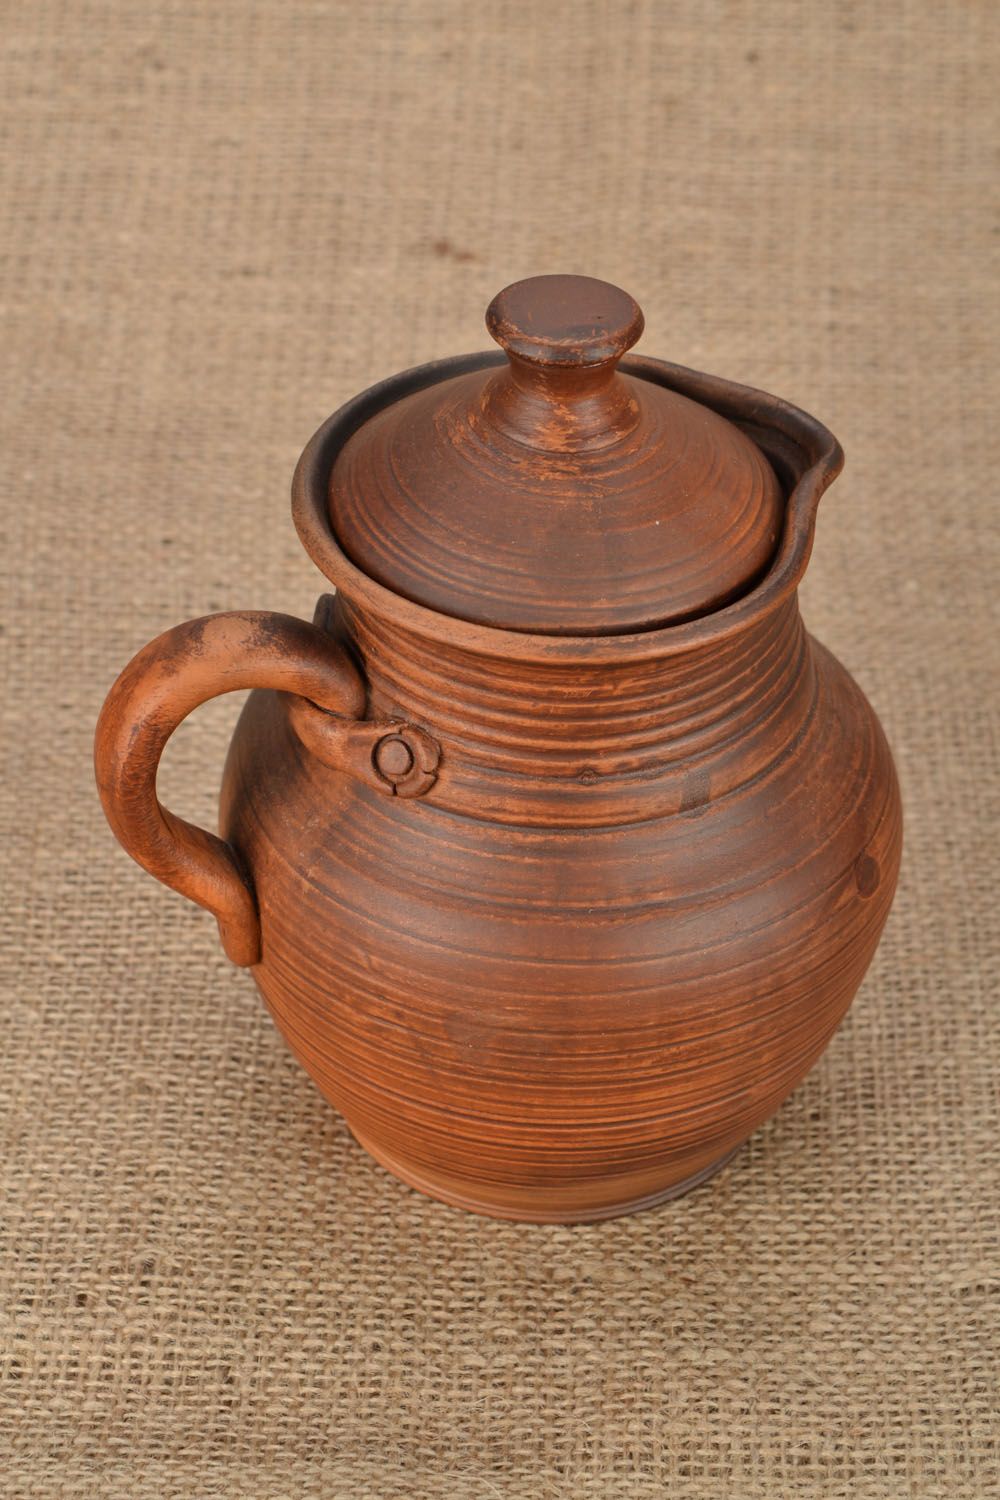 45 oz ceramic milk pitcher with handle and lid in brown color 1,19 lb photo 1